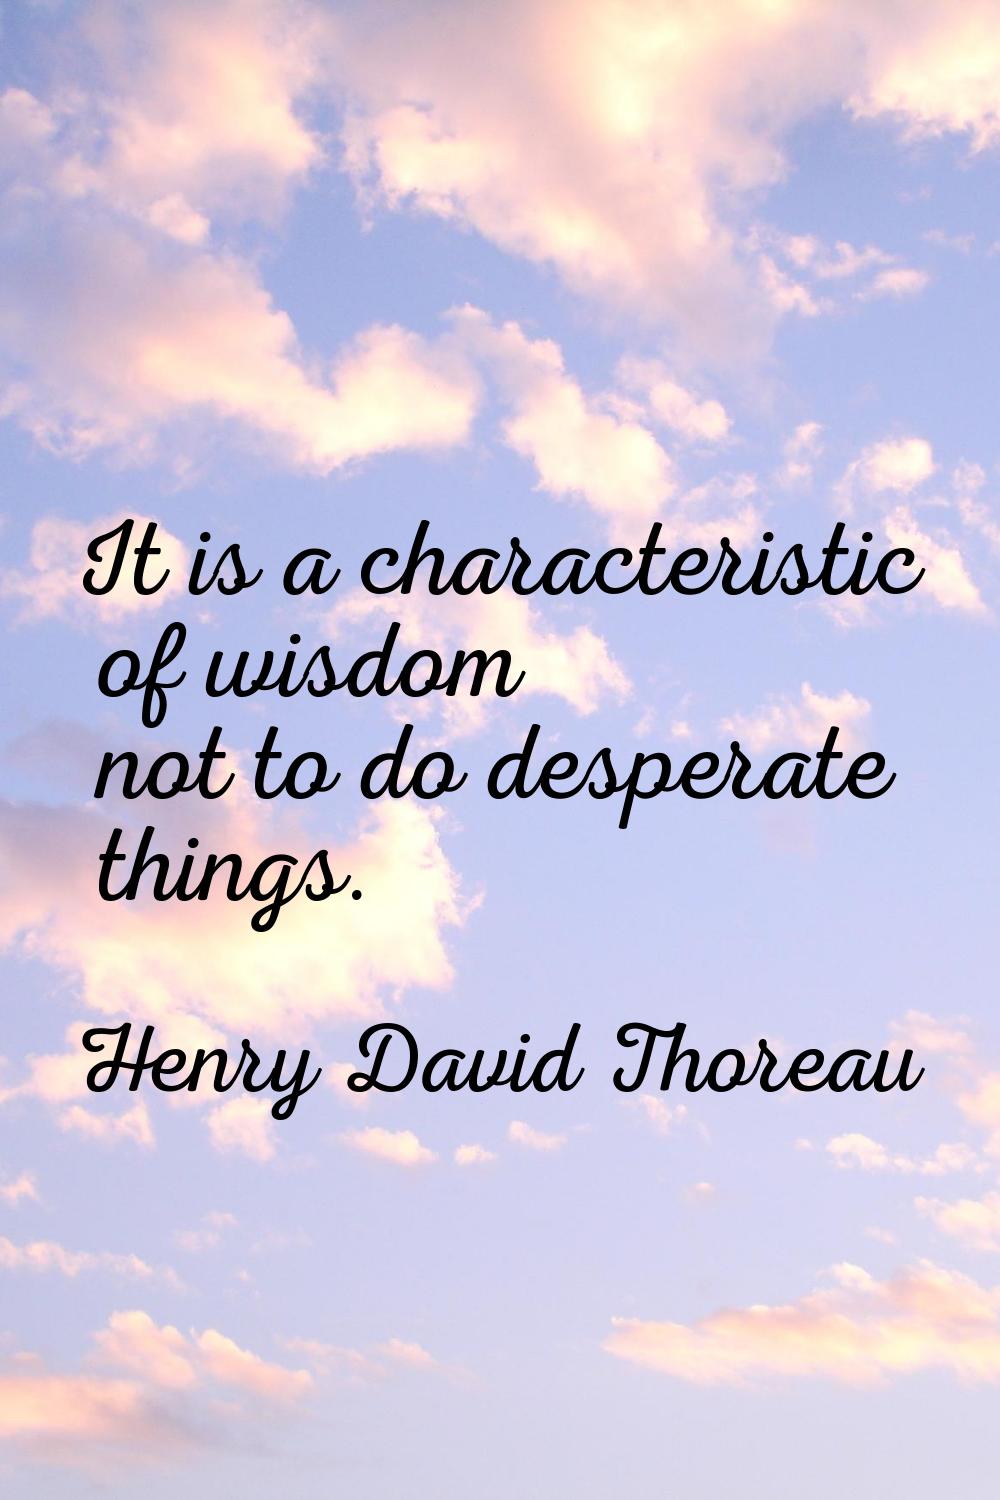 It is a characteristic of wisdom not to do desperate things.